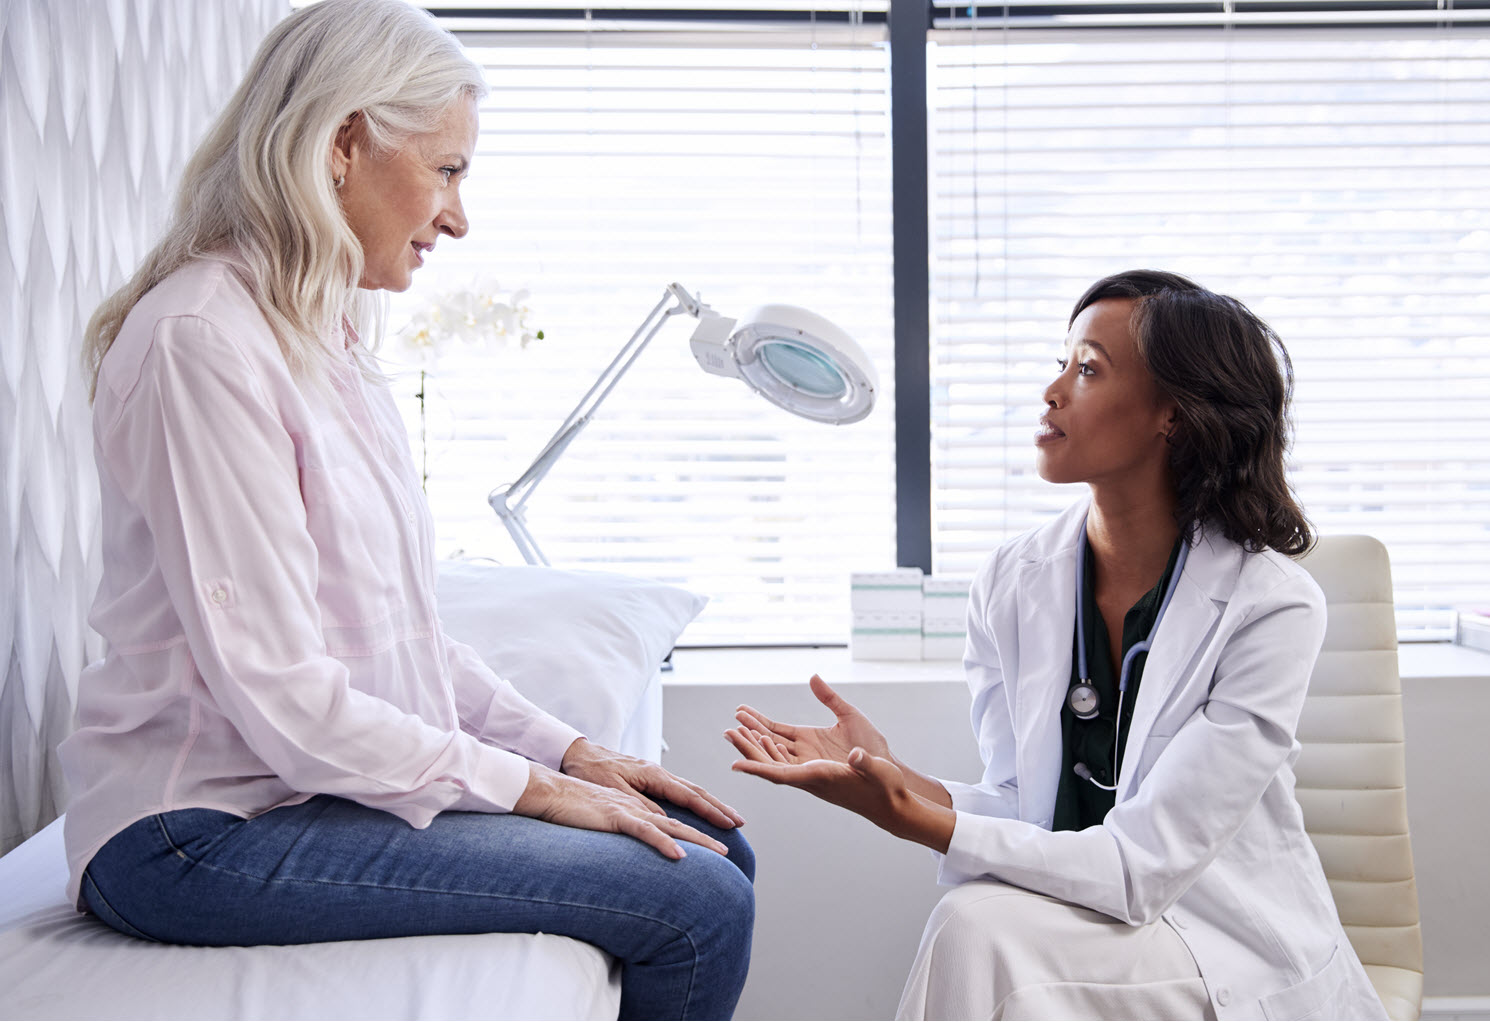 Healthcare provider engaging in motivational interviewing with a patient